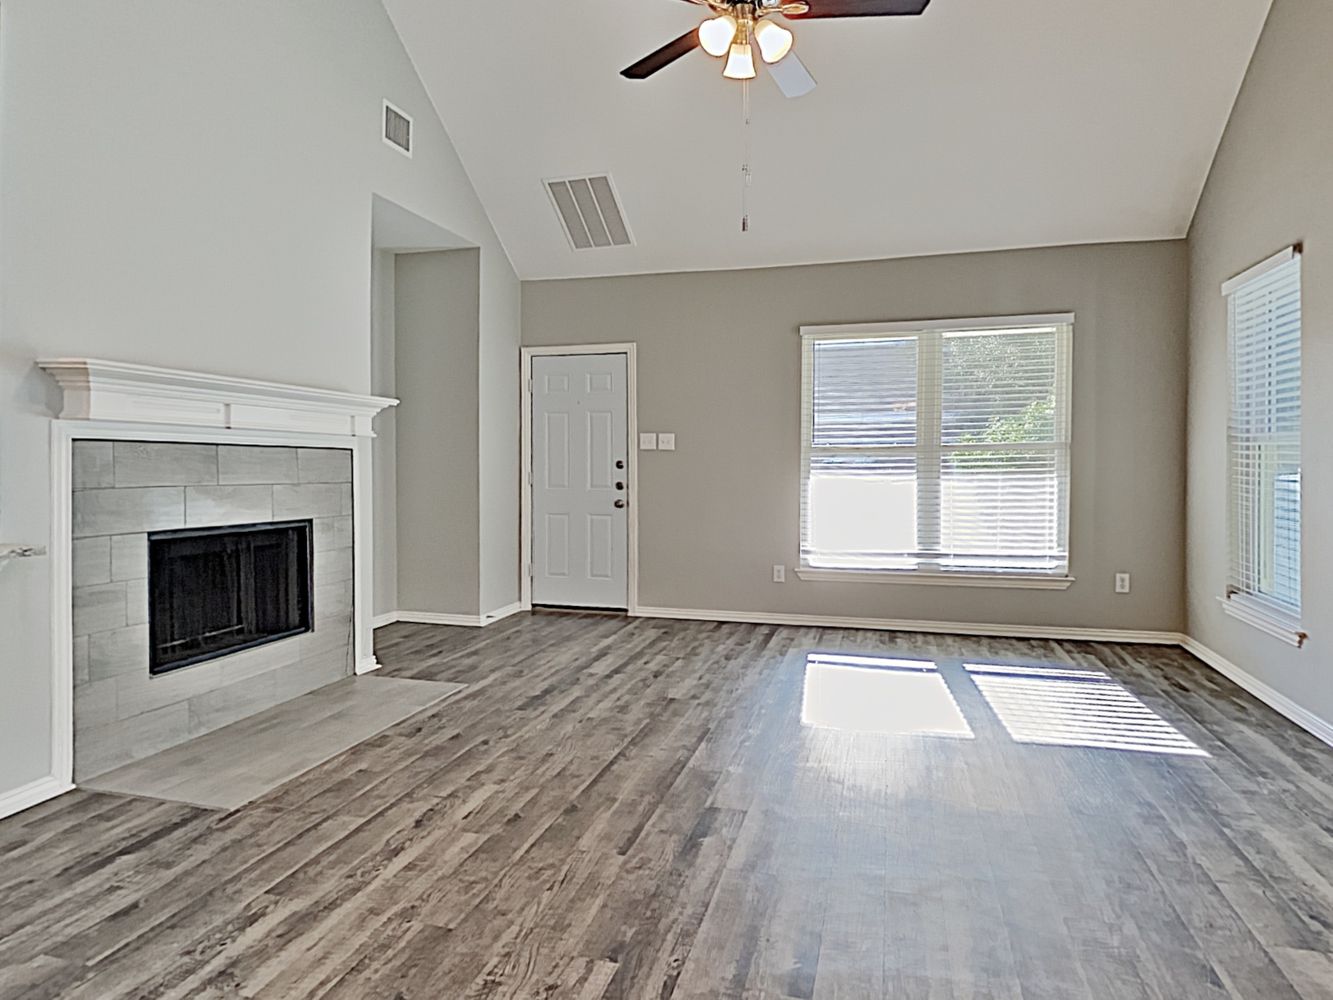 Family room with a fireplace, ceiling fan, and vinyl plank flooring at Invitation Homes Dallas.